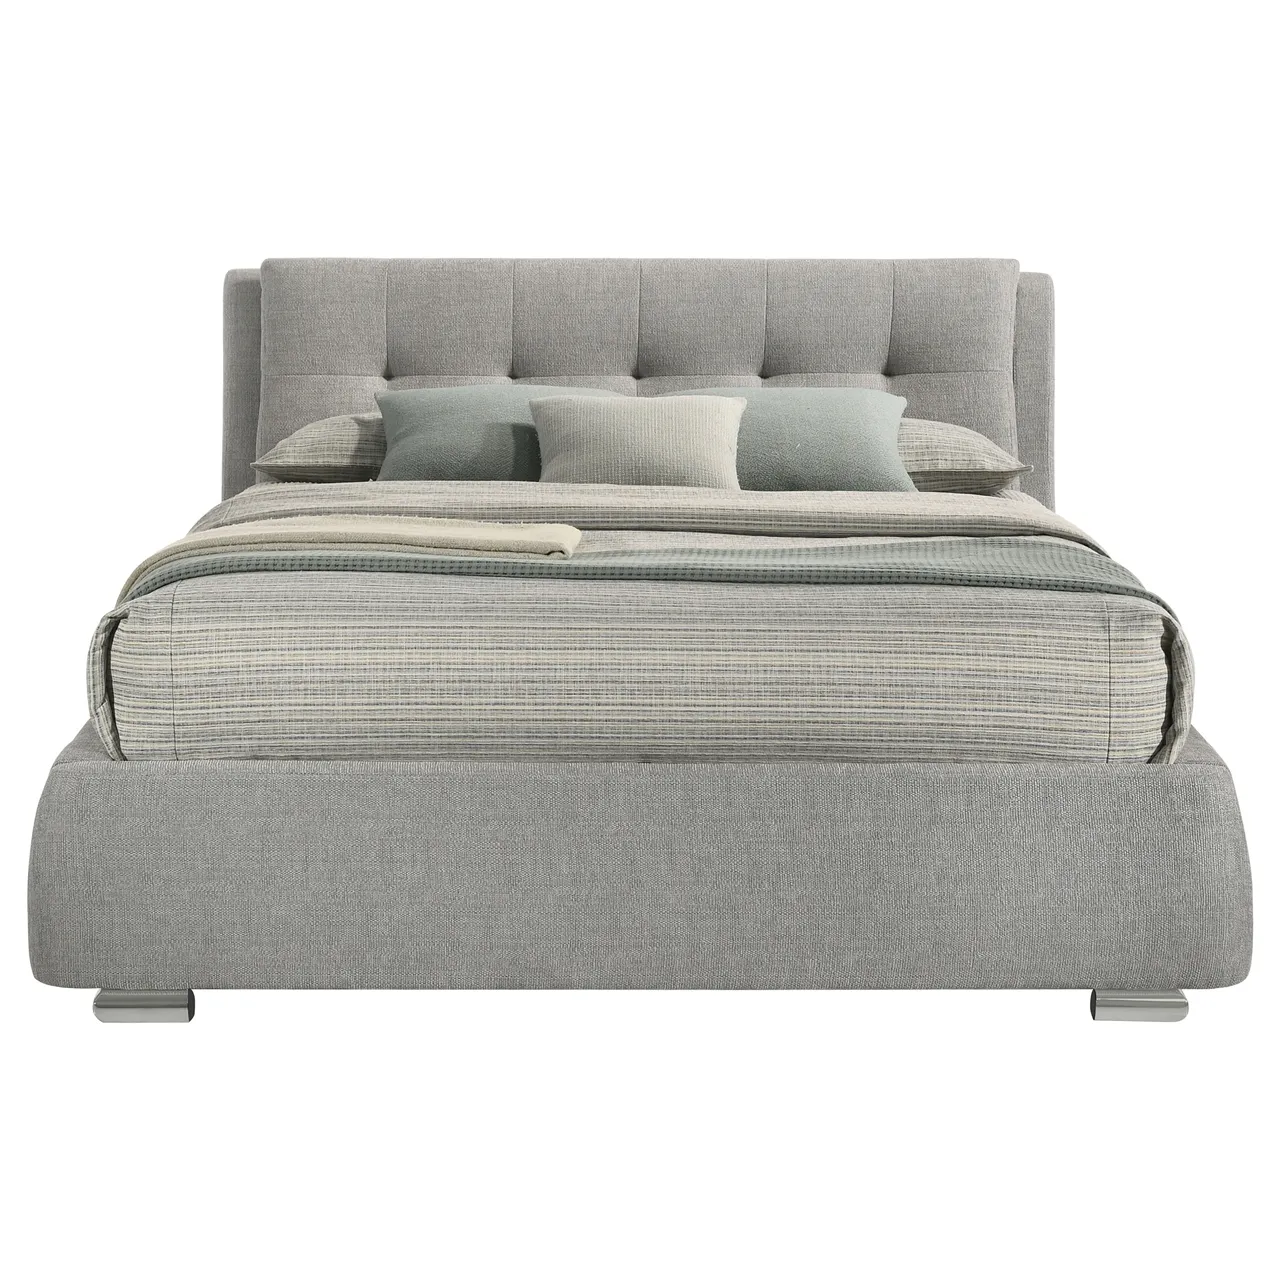 FENBROOK QUEEN UPHOLSTERED STORAGE BED GREY CHROME